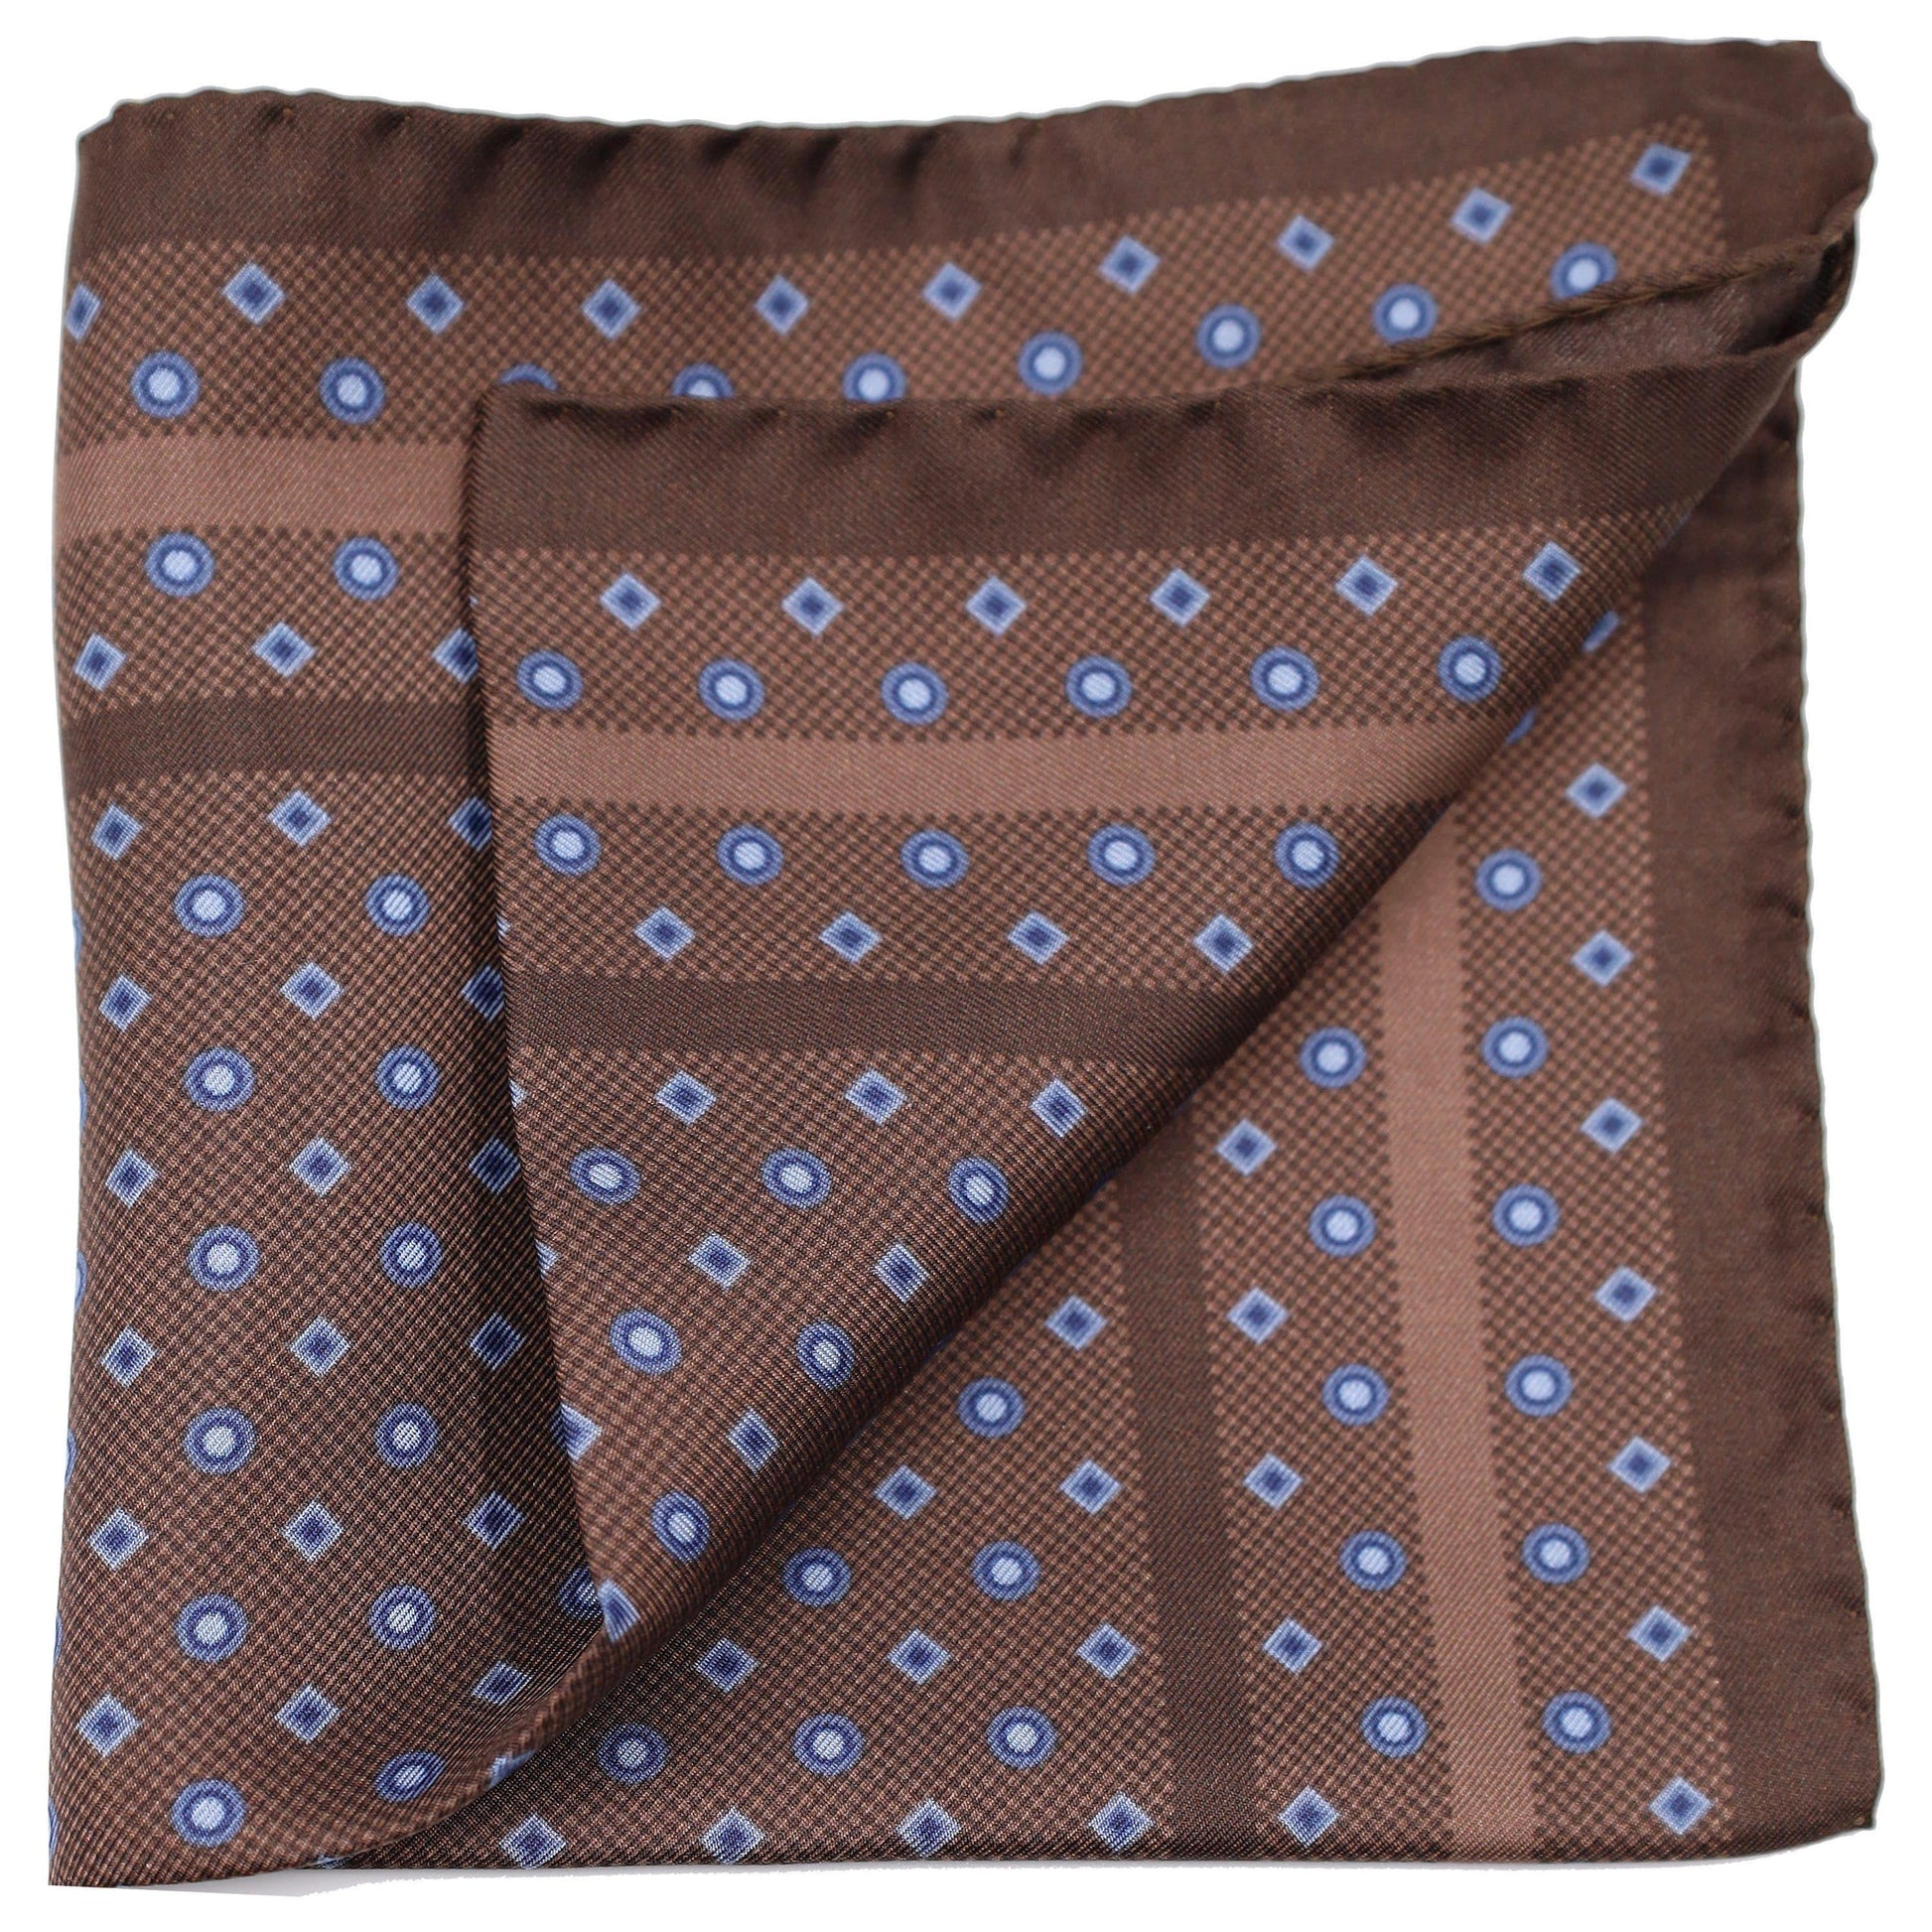 Sky blue pips on Brown background Silk Pocket Square - Just White Shirts